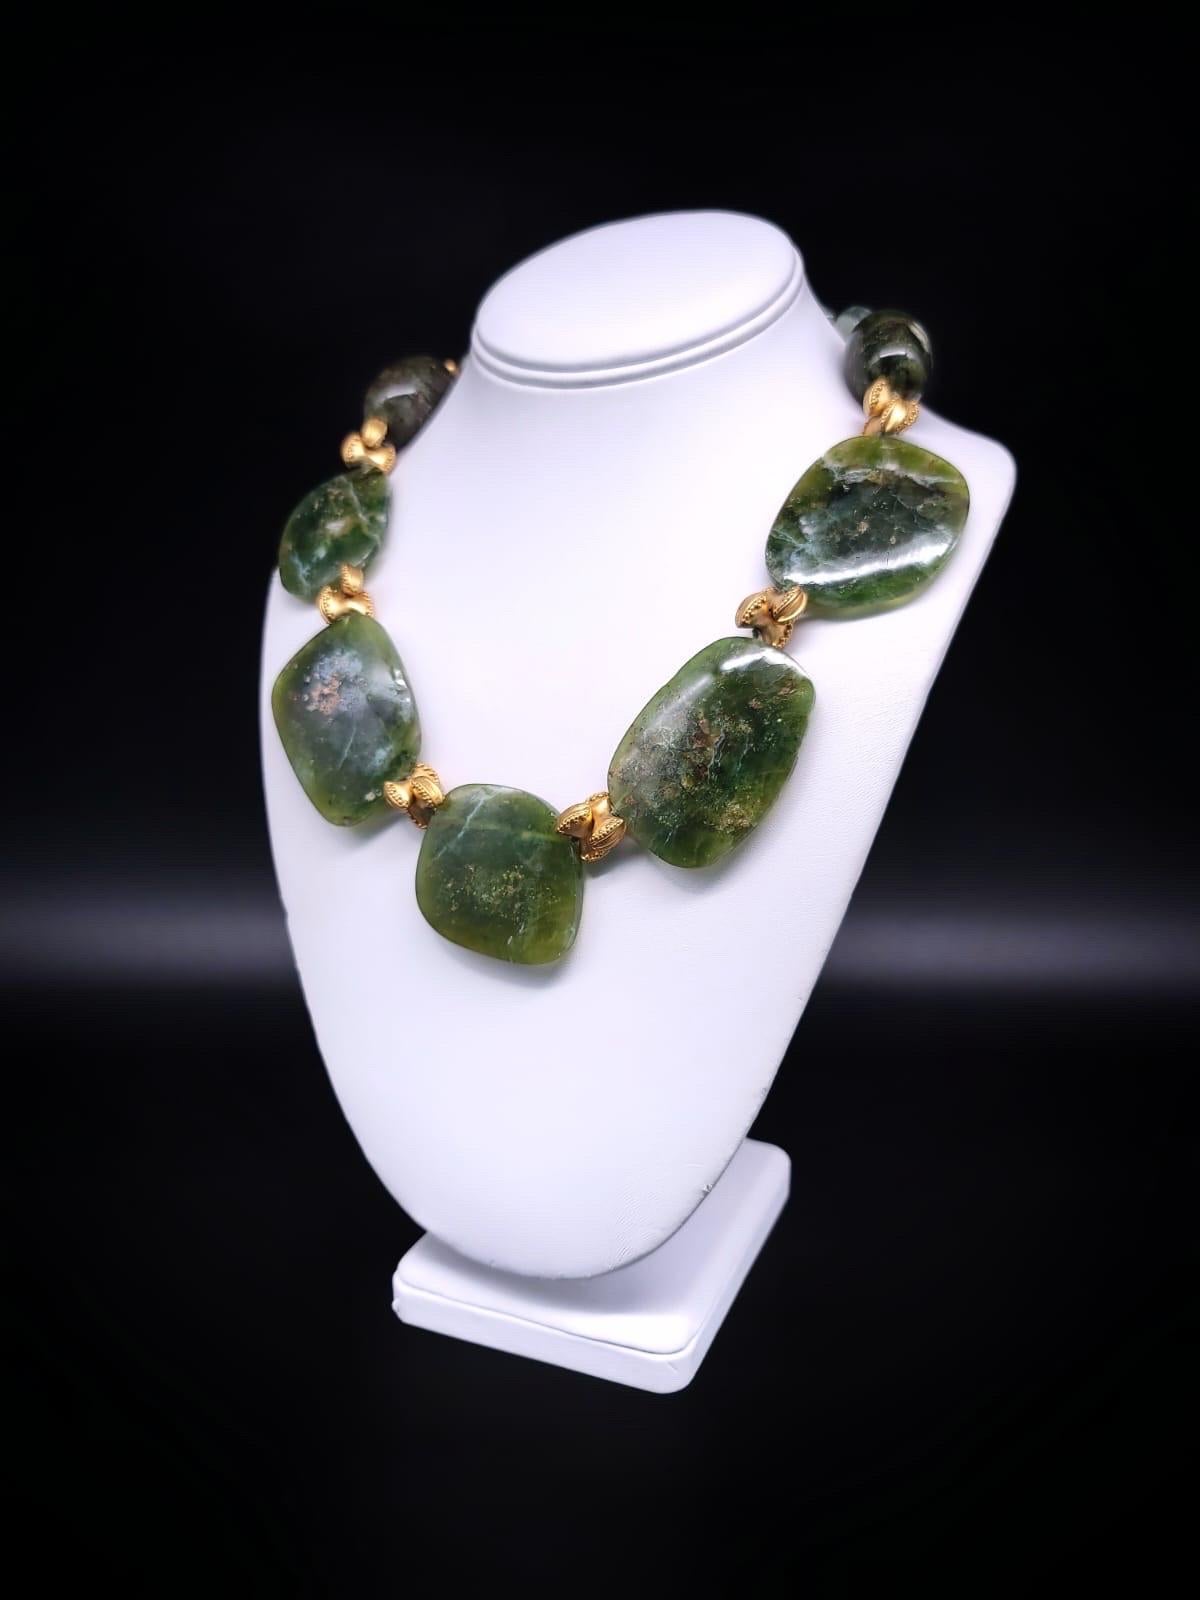 One-of-a-Kind
Indulge in the captivating allure of this unique Green Opal necklace, featuring large polished plates that shimmer and dance in the light, just like the finest Opals do. The stunning green hue of the Opals is perfectly complemented by